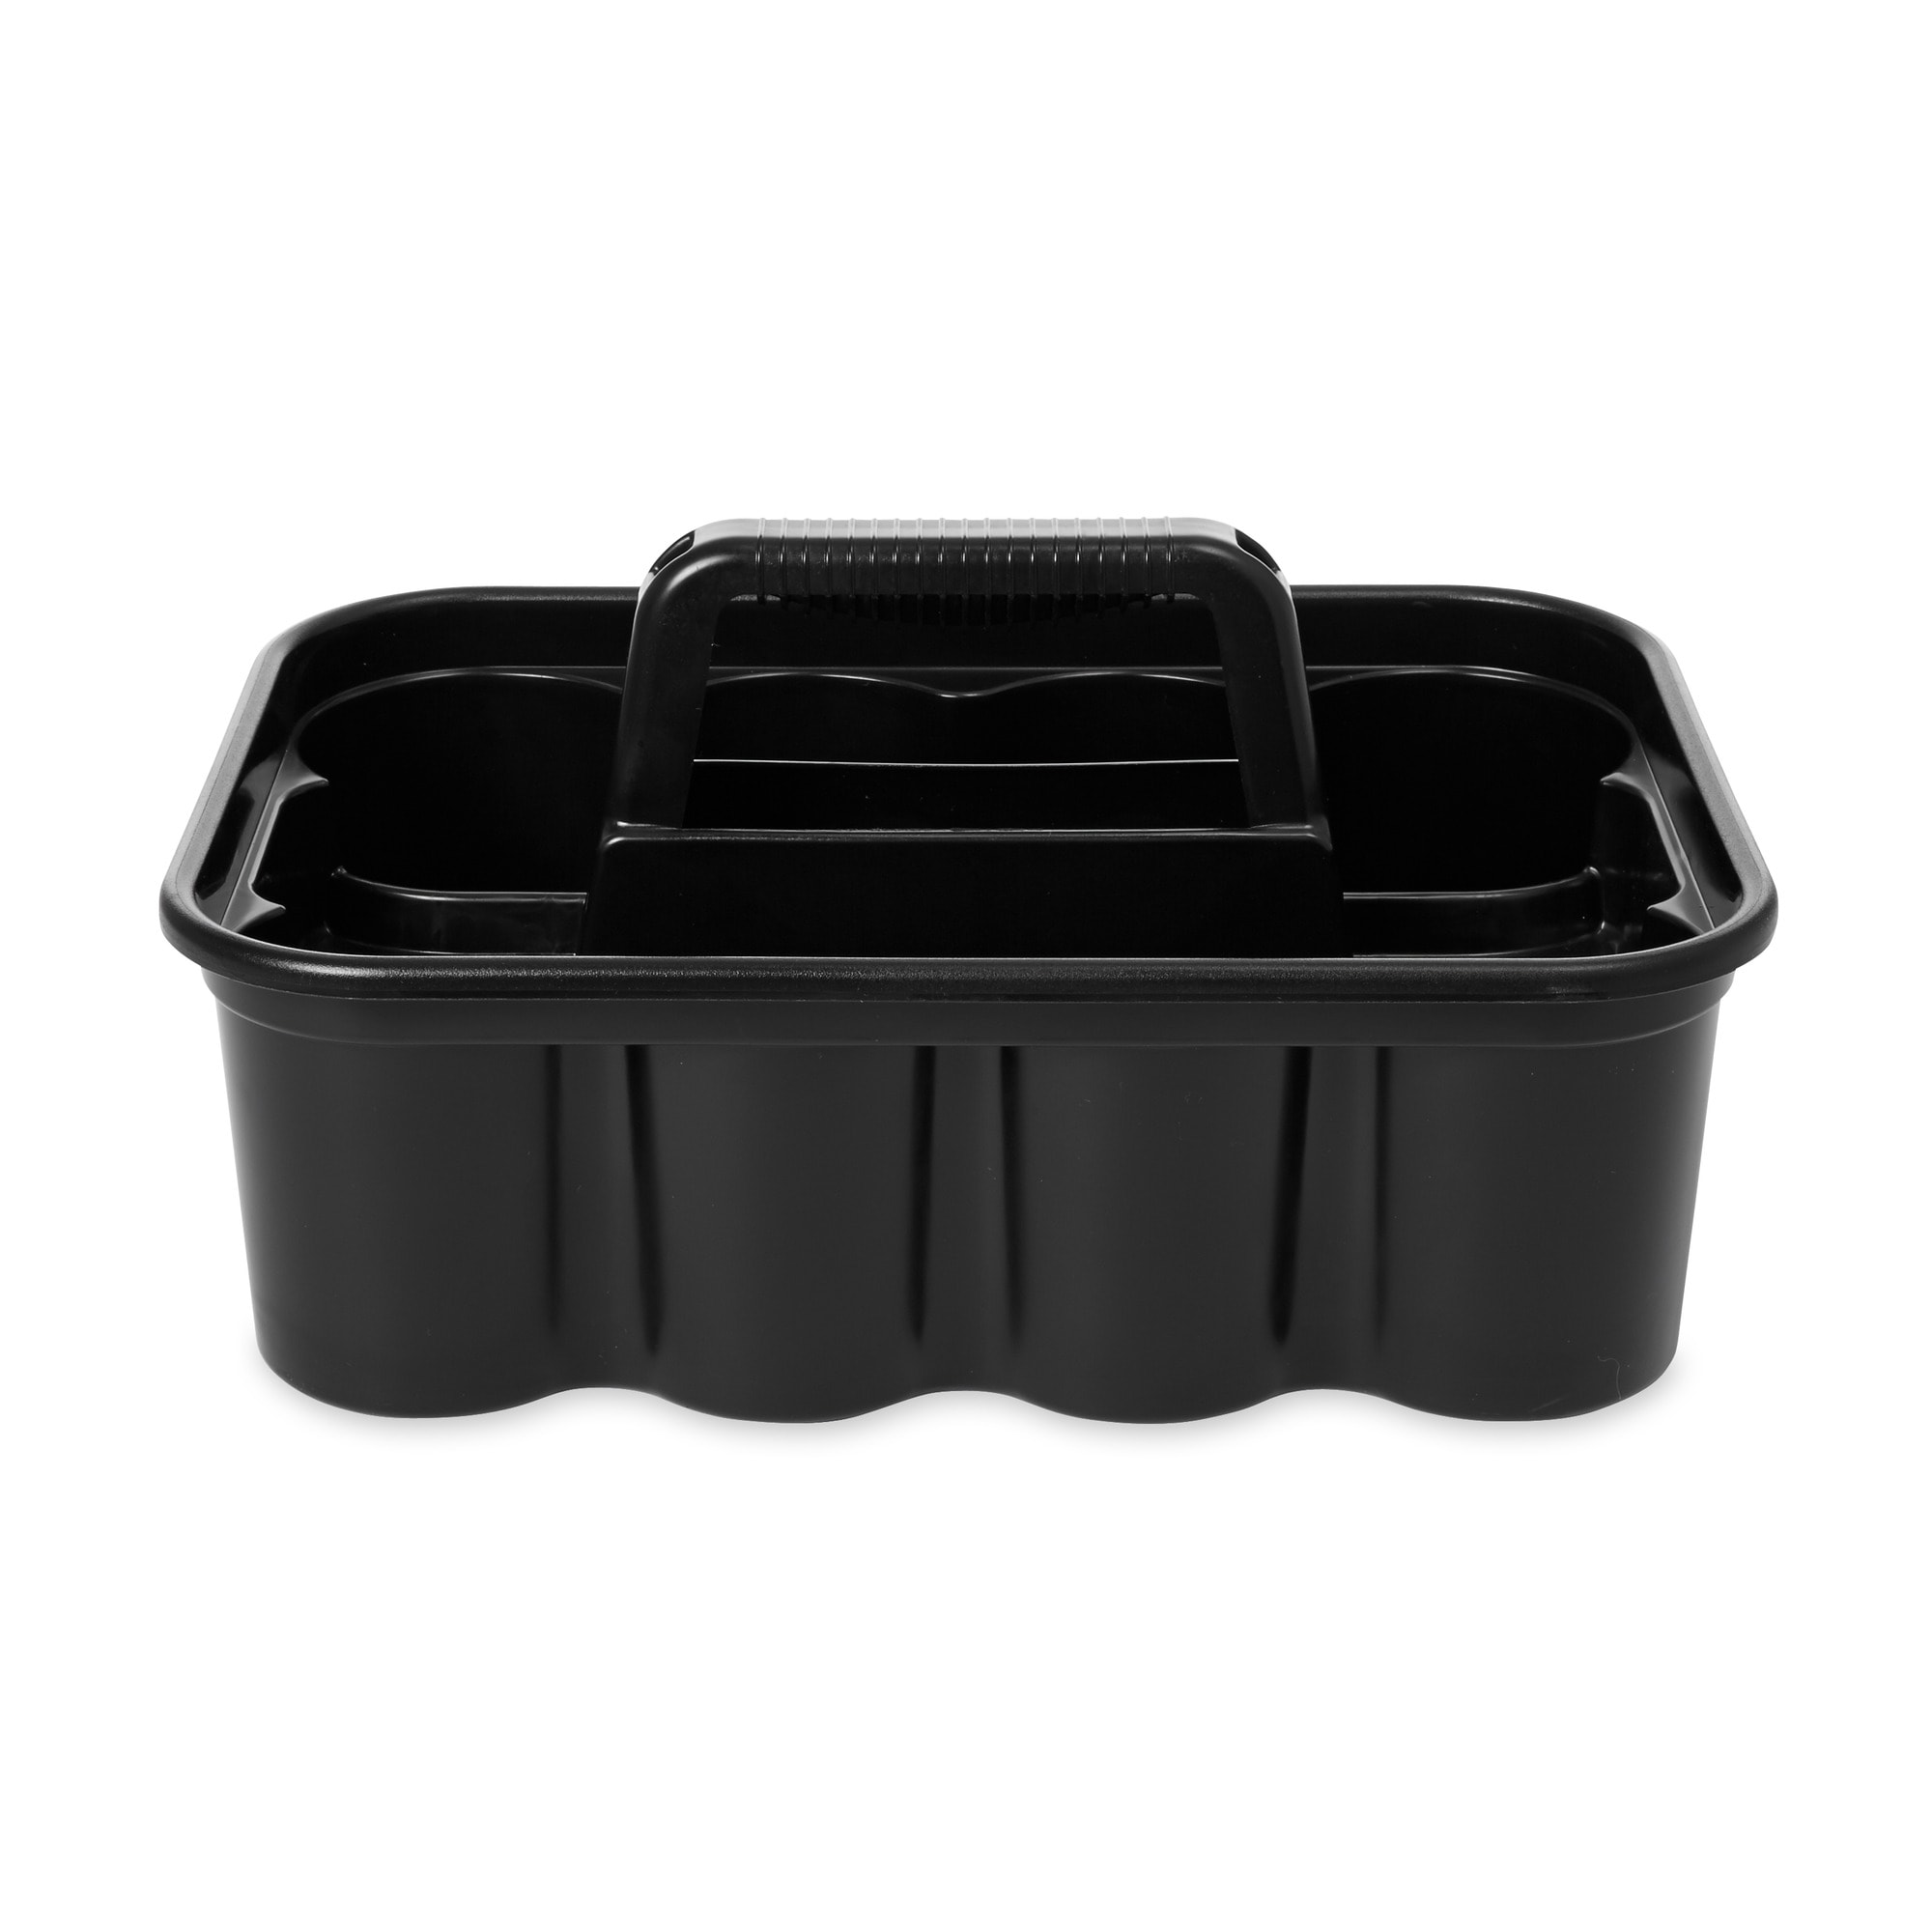 Rubbermaid Commercial Products 2-Compartment Plastic Cleaning